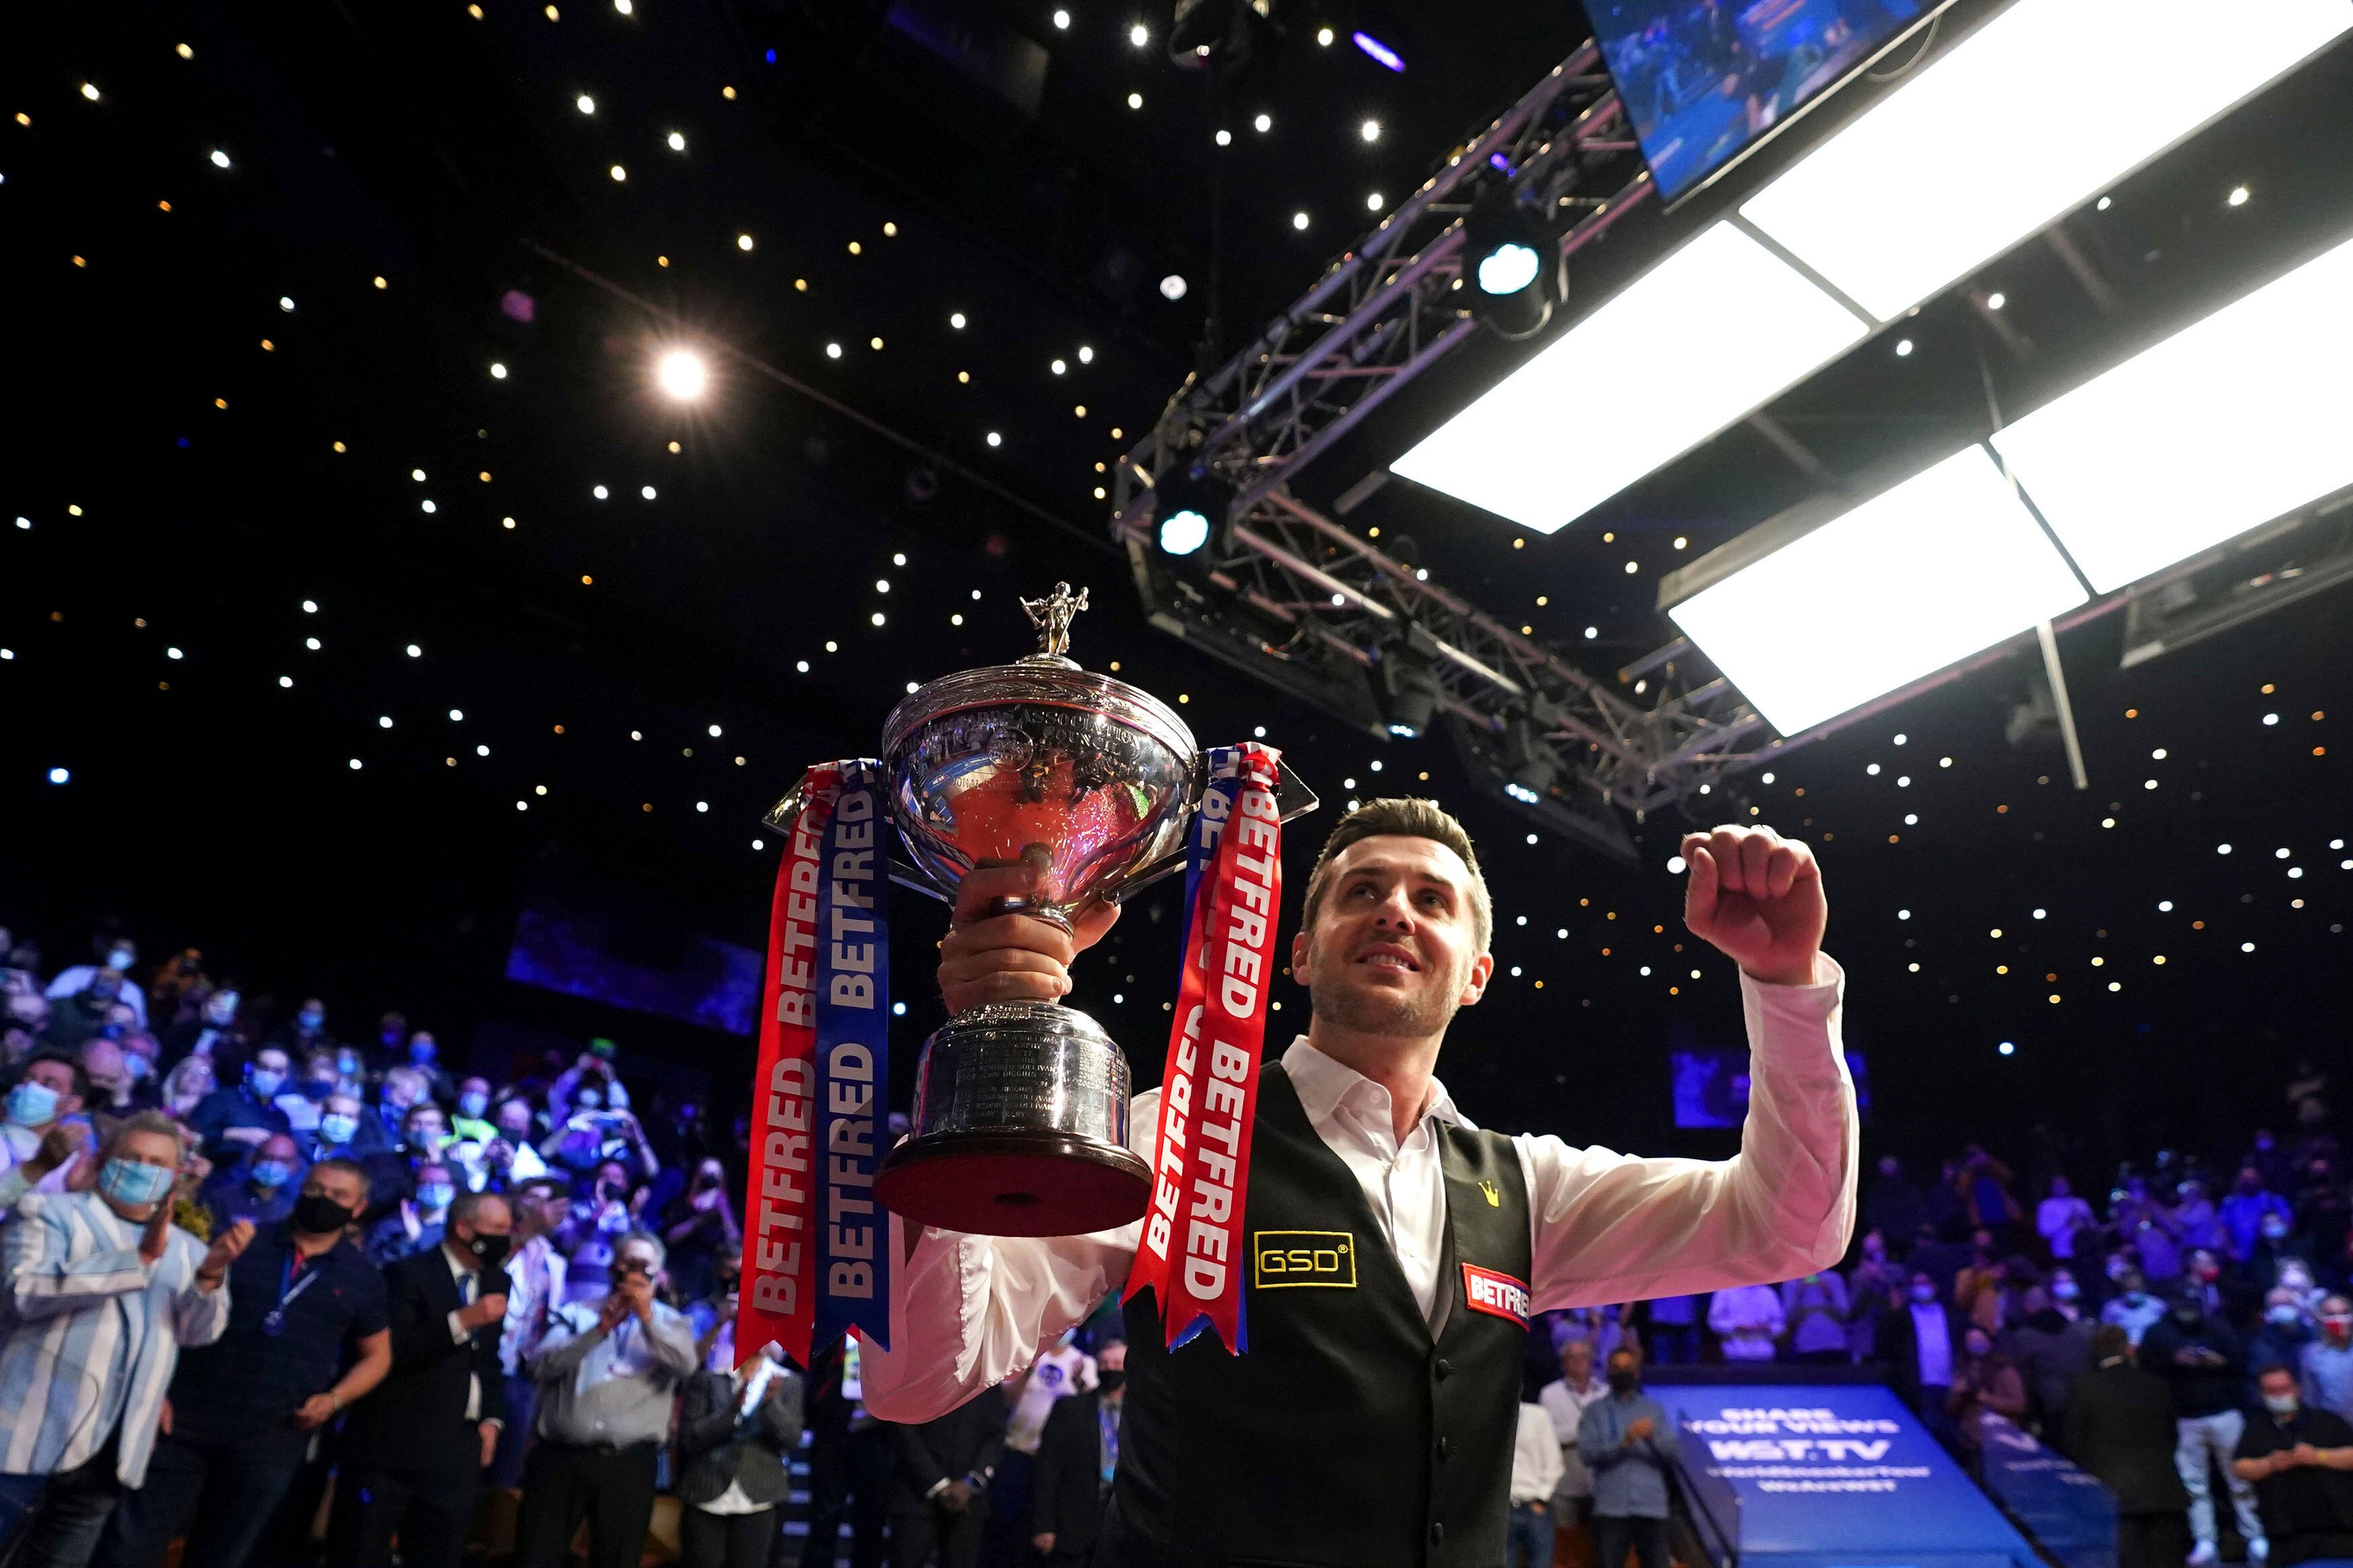 Full house at Crucible sees Selby win world snooker champs The Seattle Times